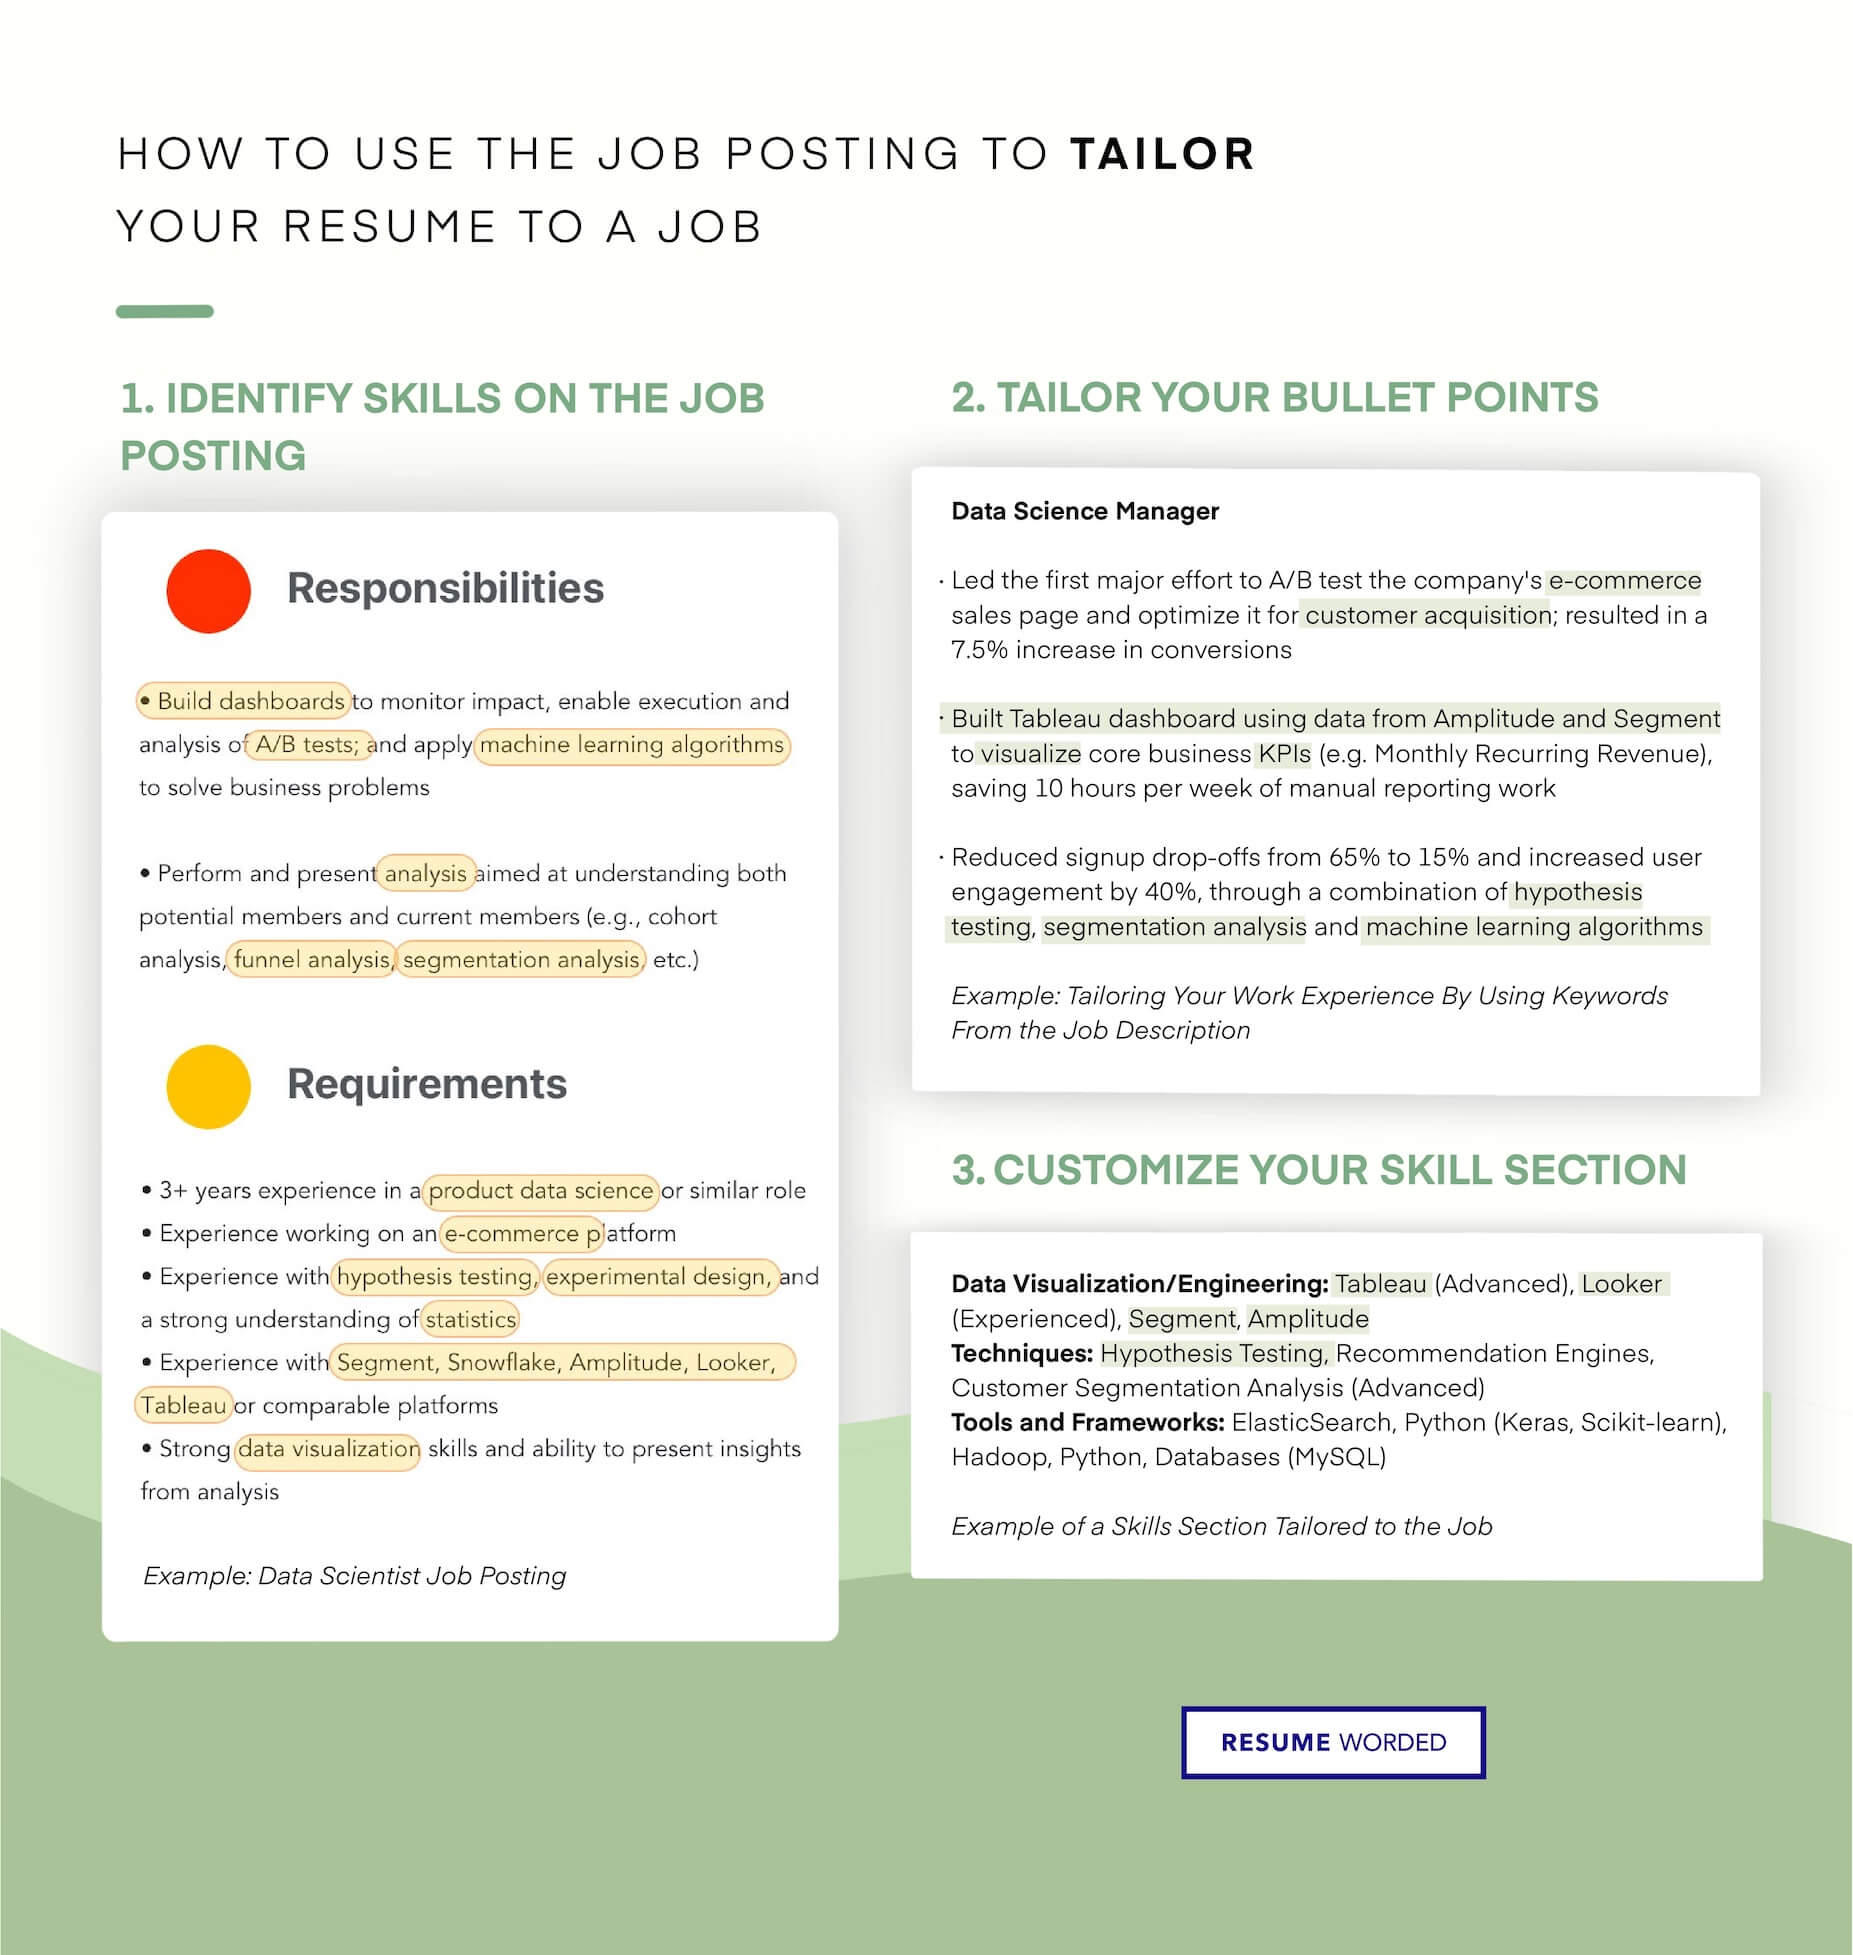 Tailored to the job - Advertising Account Executive Resume